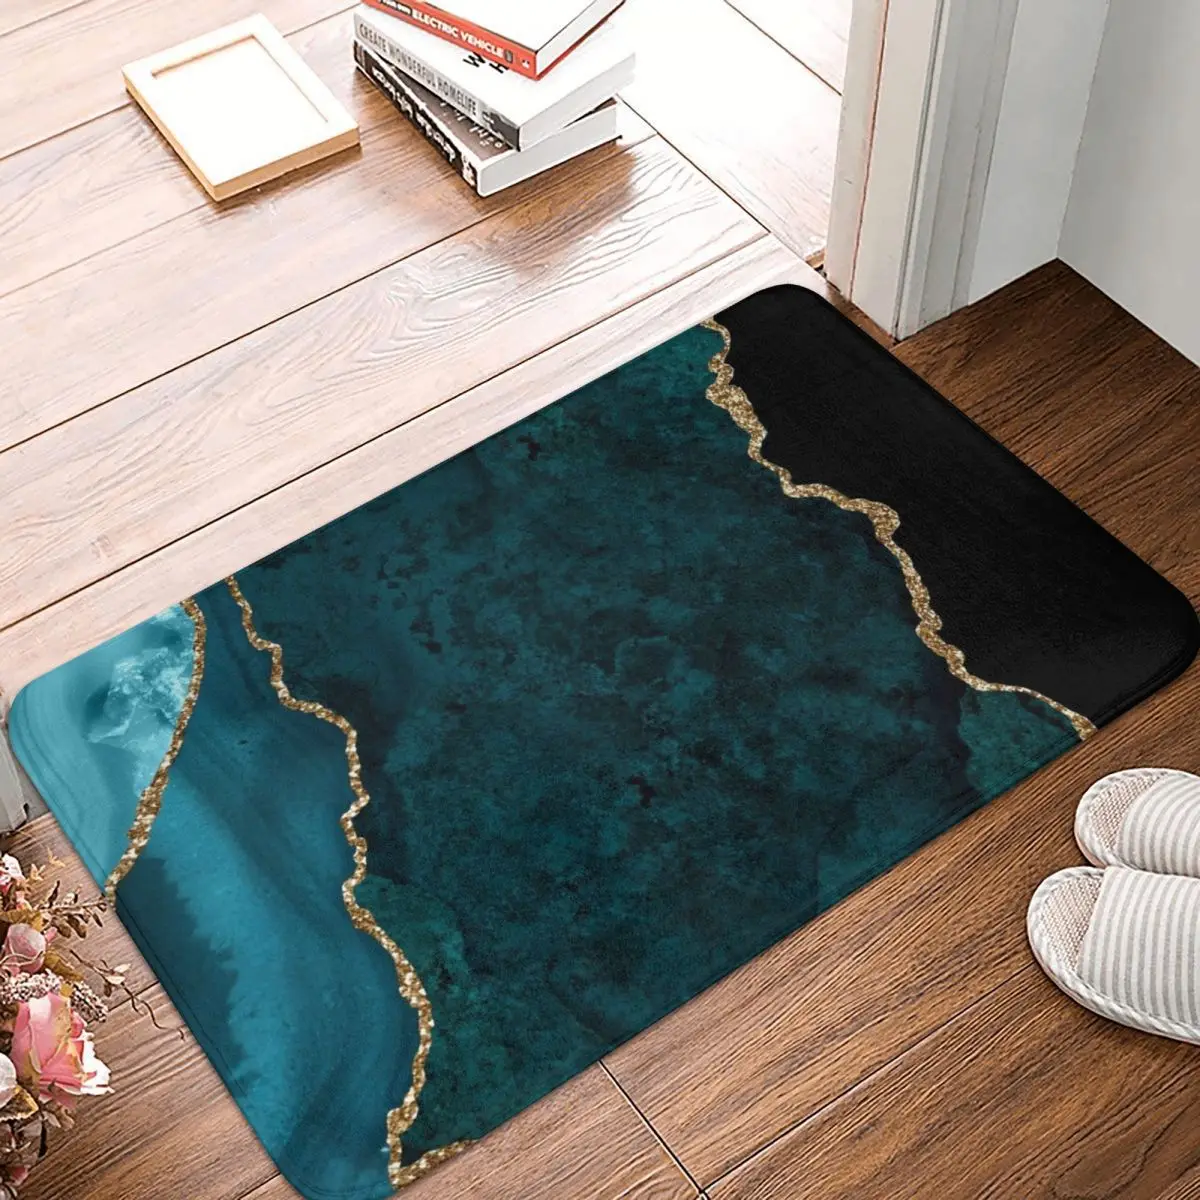 

Watercolor Agate In Teal Green And Turquoise Doormat Carpet Mat Rug Polyester Anti-slip Floor Decor Bath Bathroom Kitchen 40x60